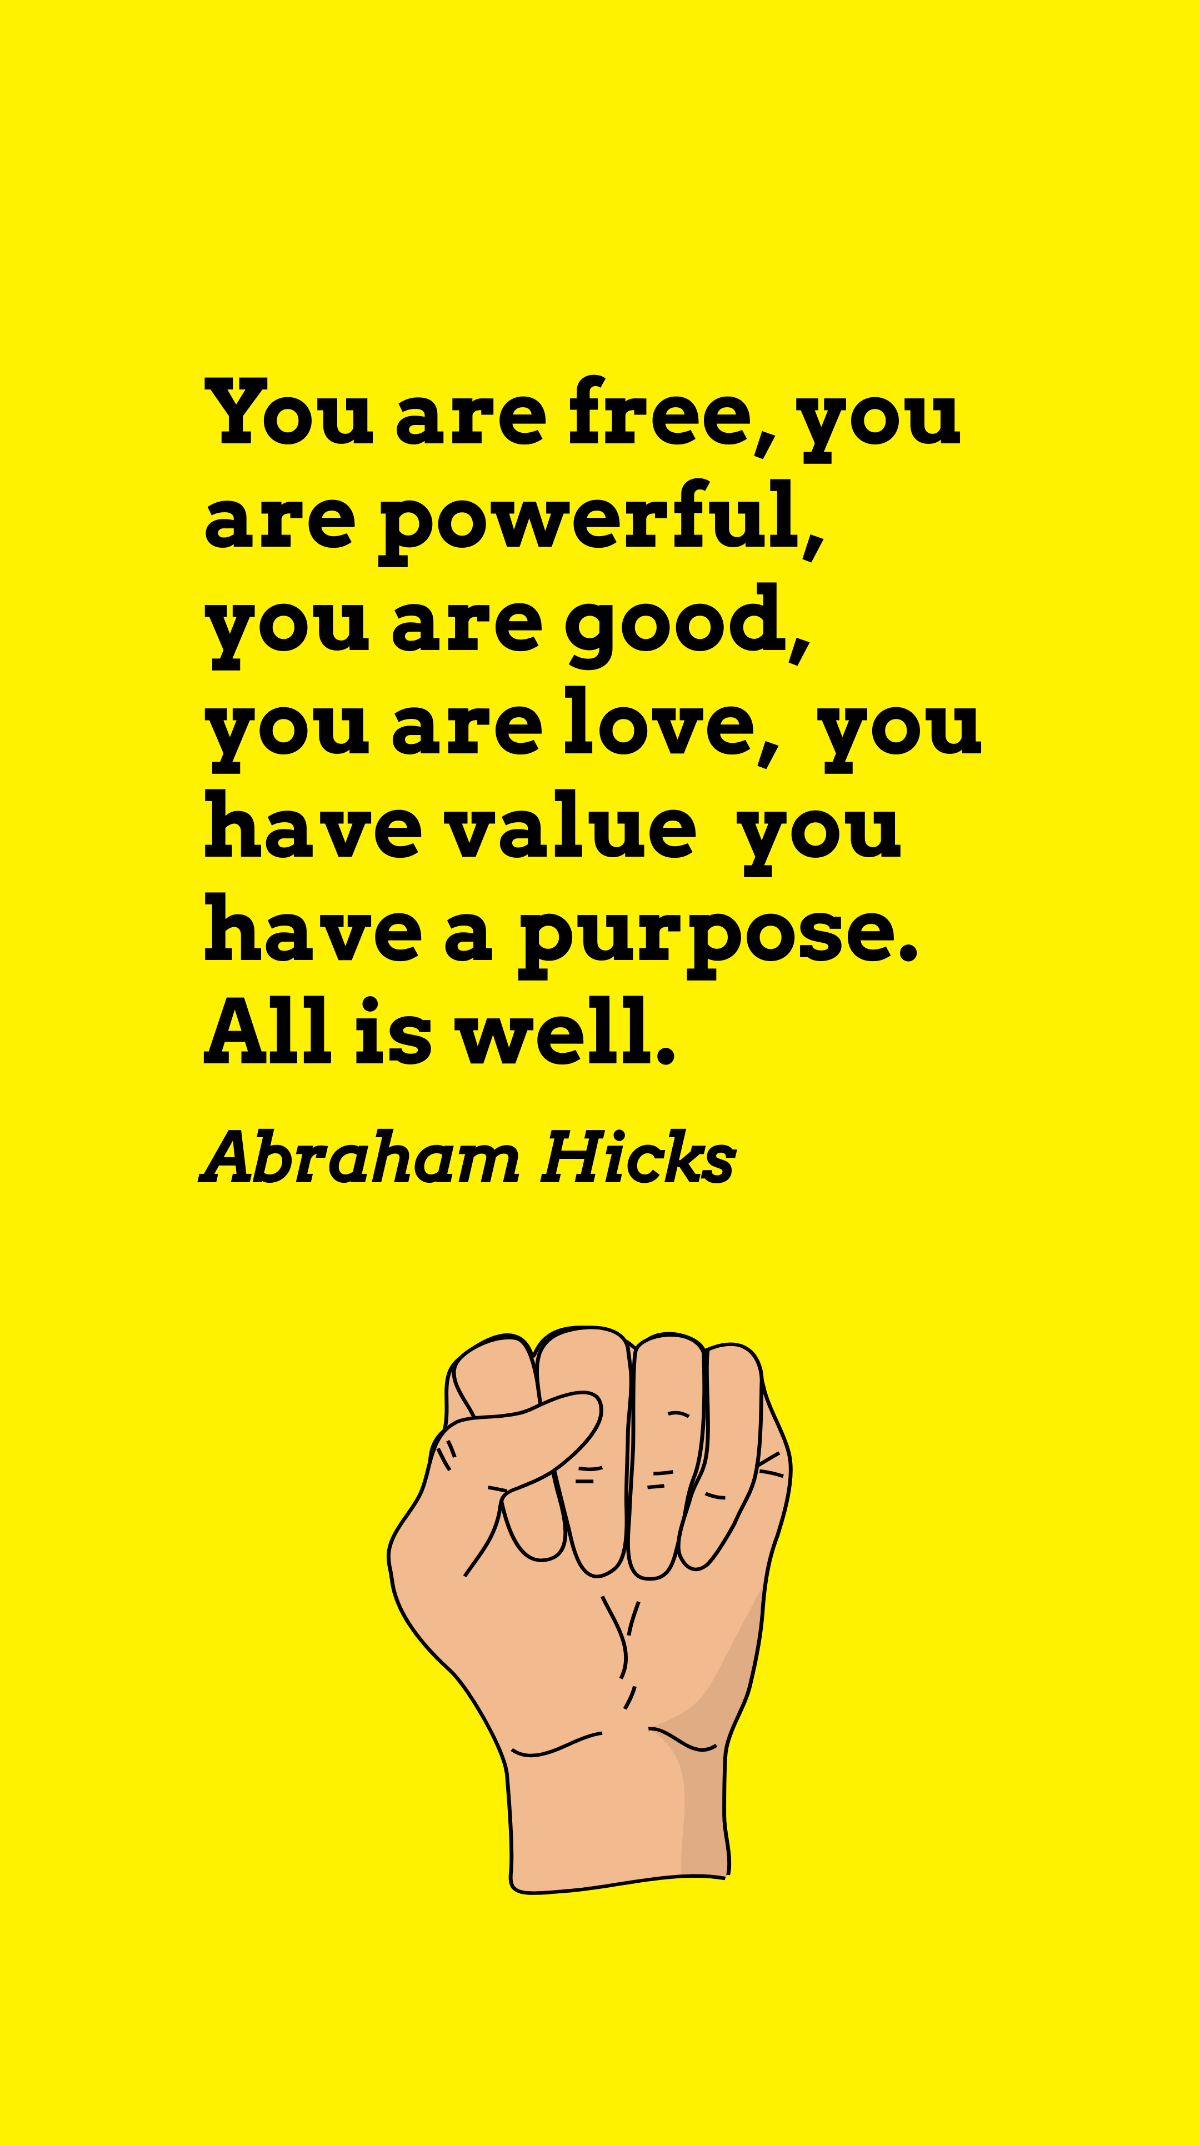 Abraham Hicks - You are free, you are powerful, you are good, you are love, you have value you have a purpose. All is well. Template